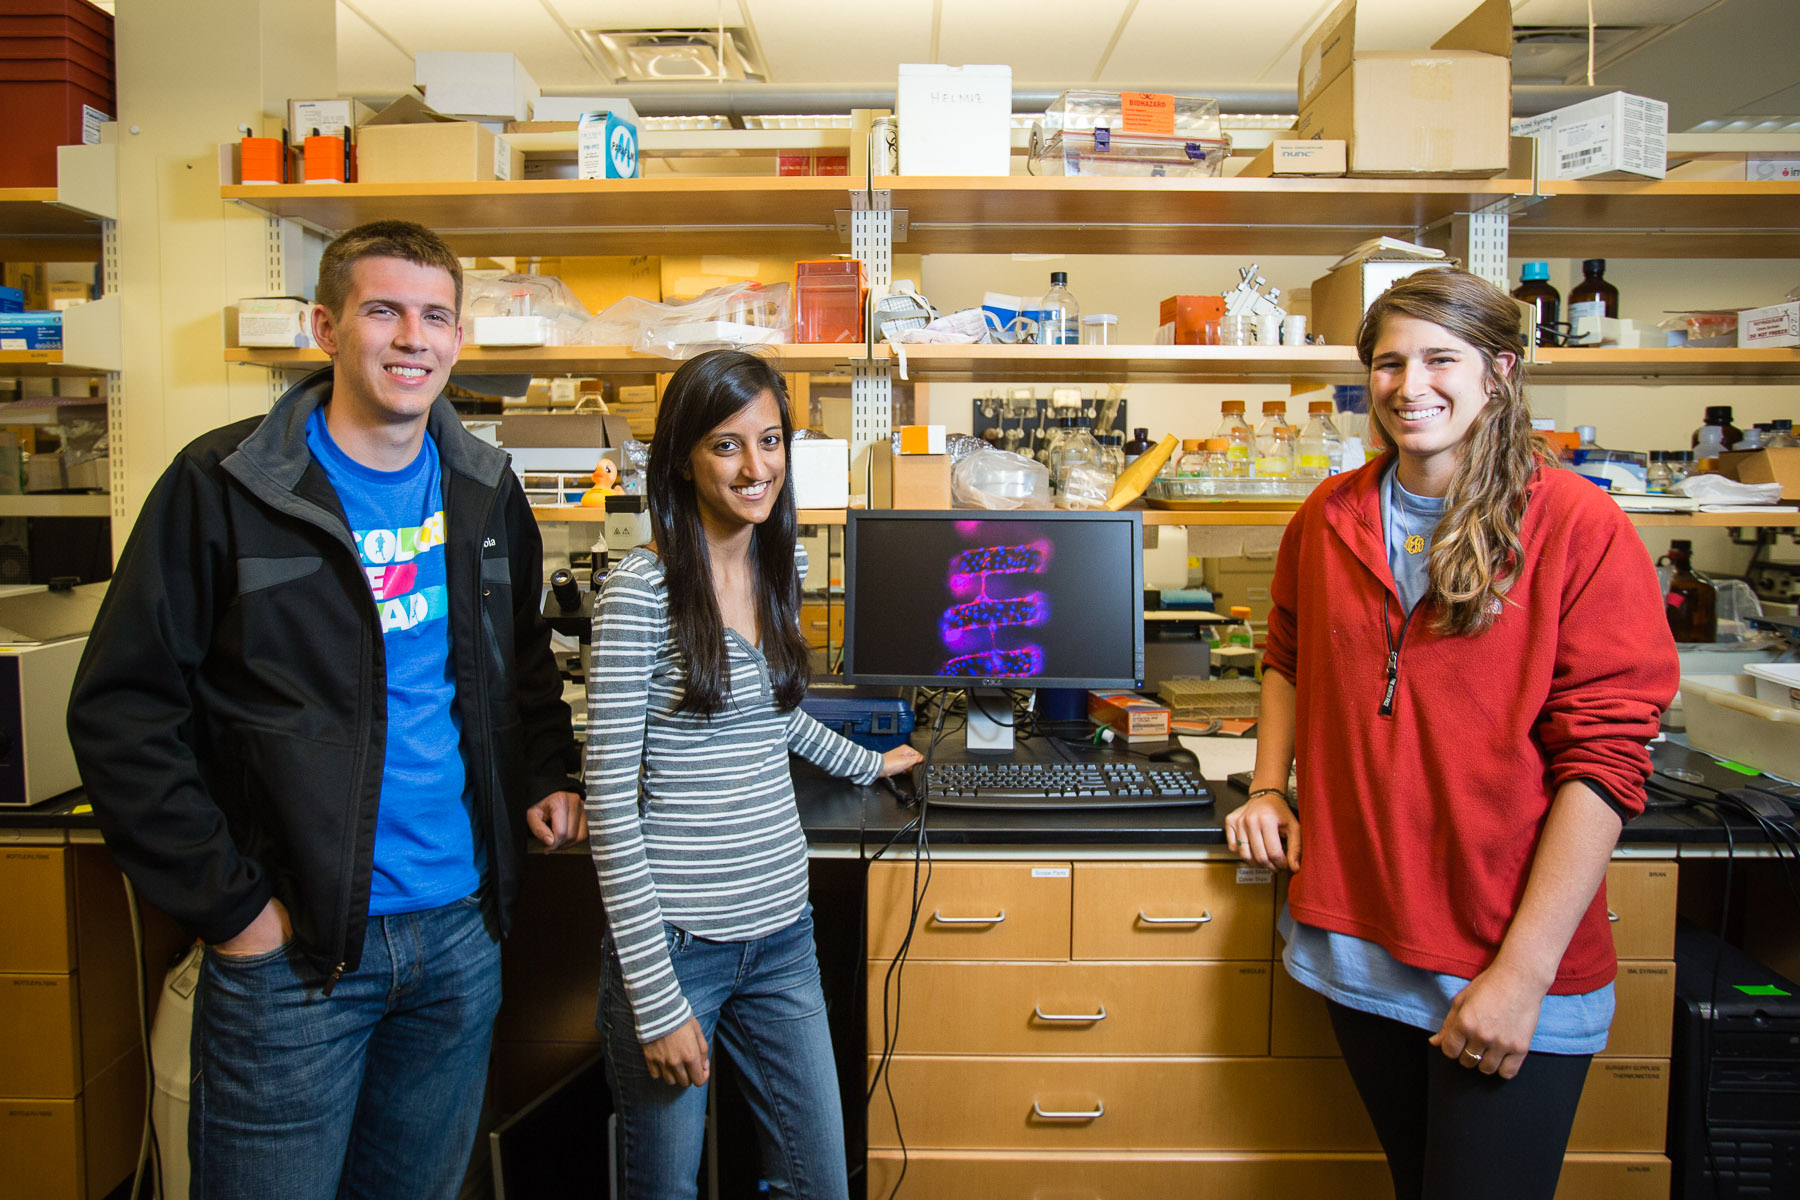 Group photo left to right; Brian Griffin, Shipra Maheshwari and Molly Jenner smile in a lab